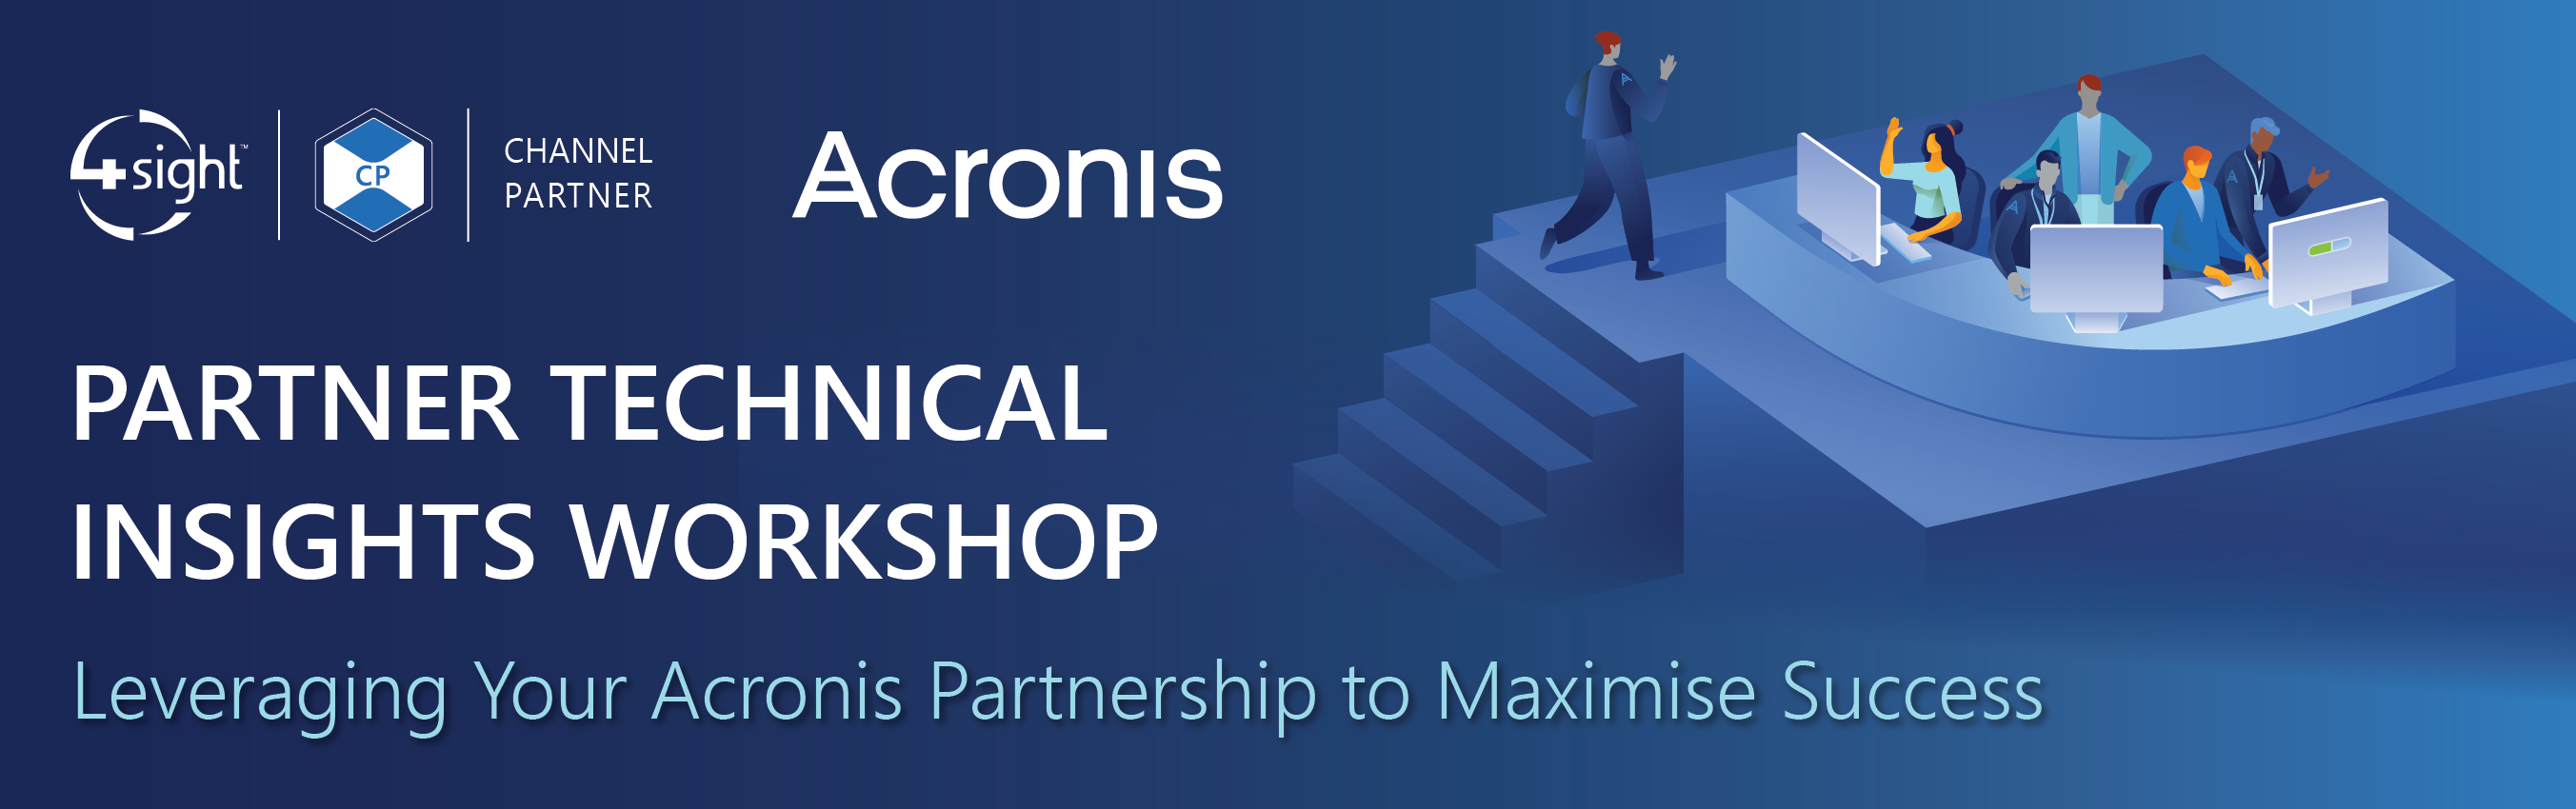 Acronis_Partner_technical_insights_sesion-07-07.png